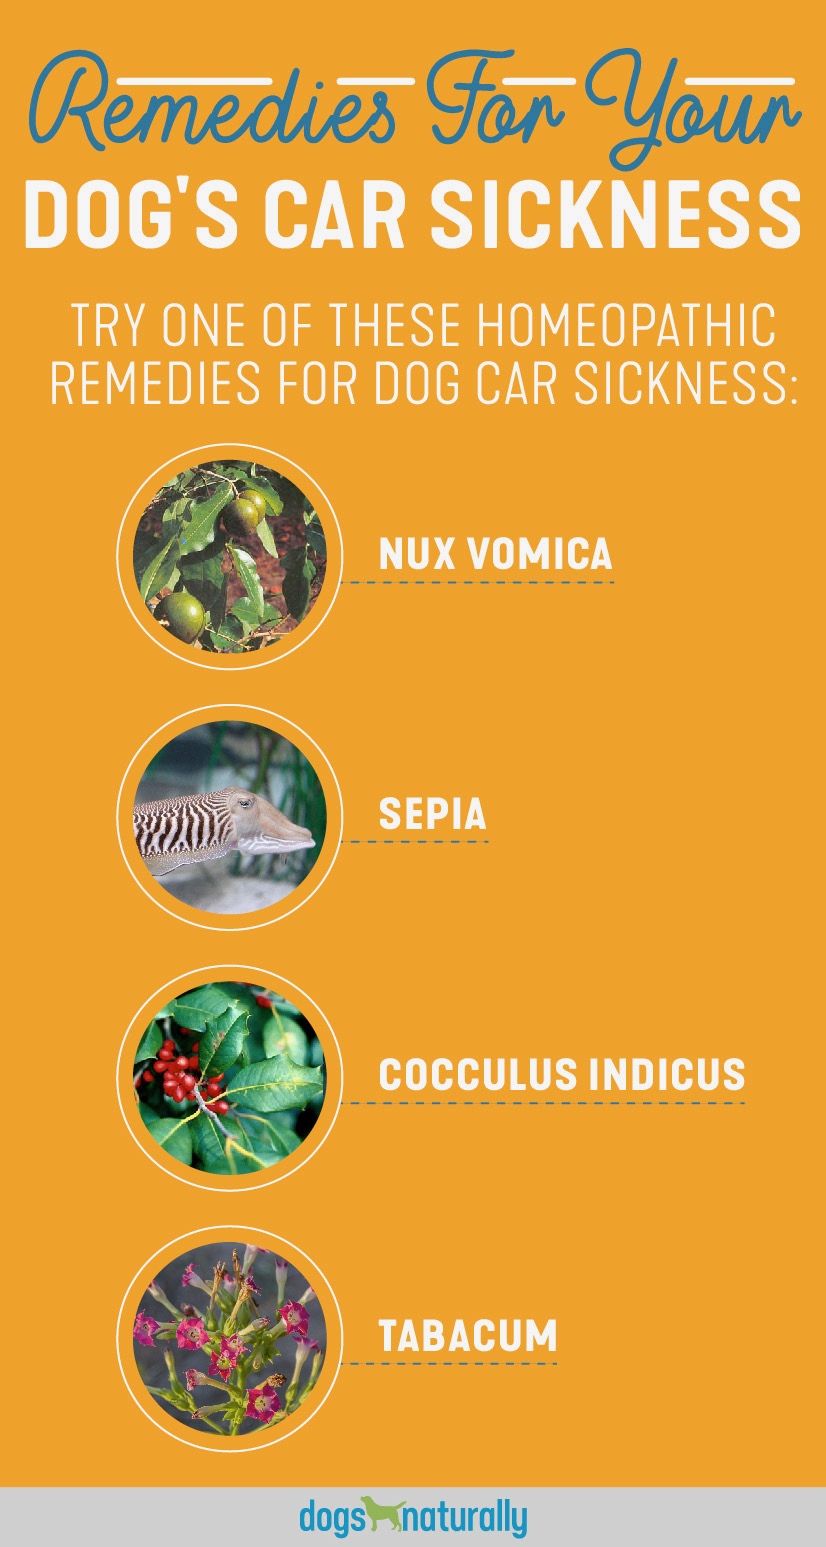 Remedies for your dog's car sickness